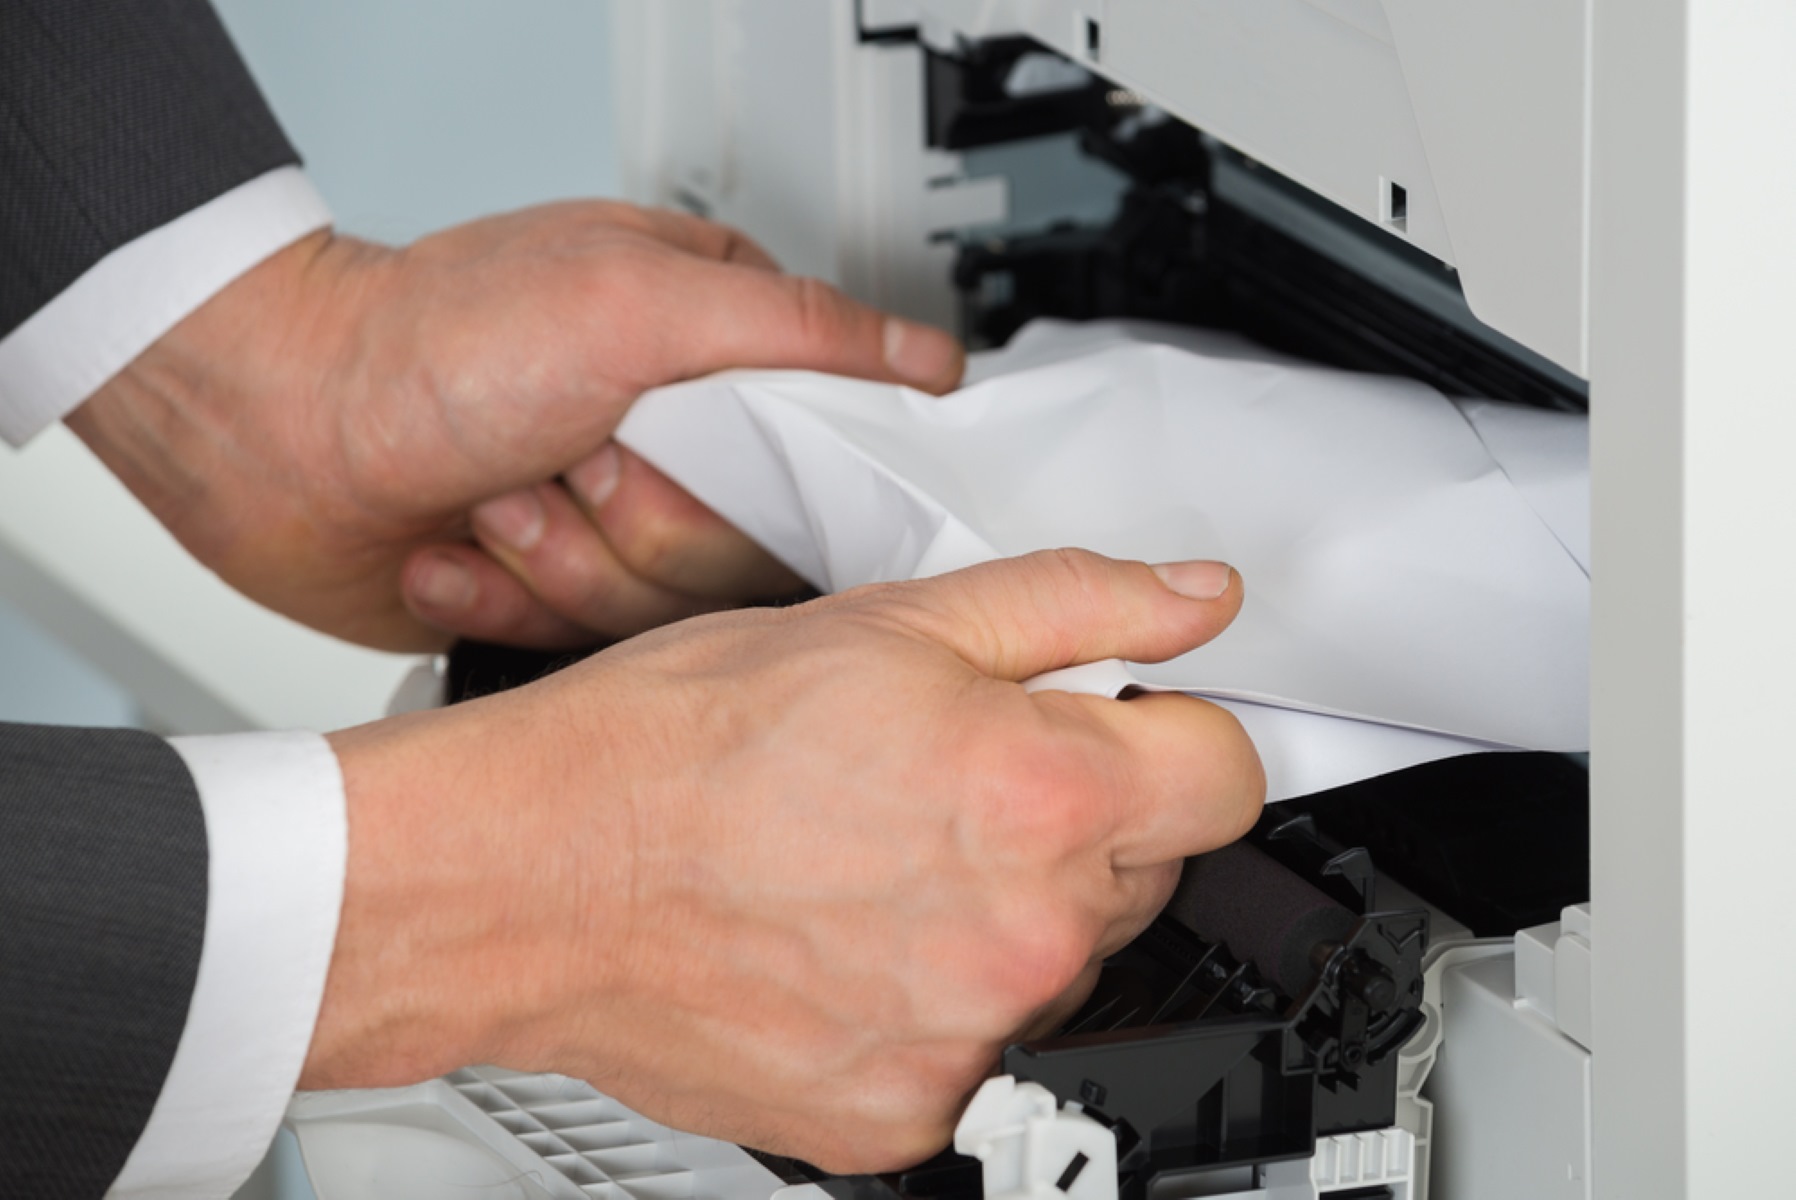 How To Unjam Paper From HP Printer